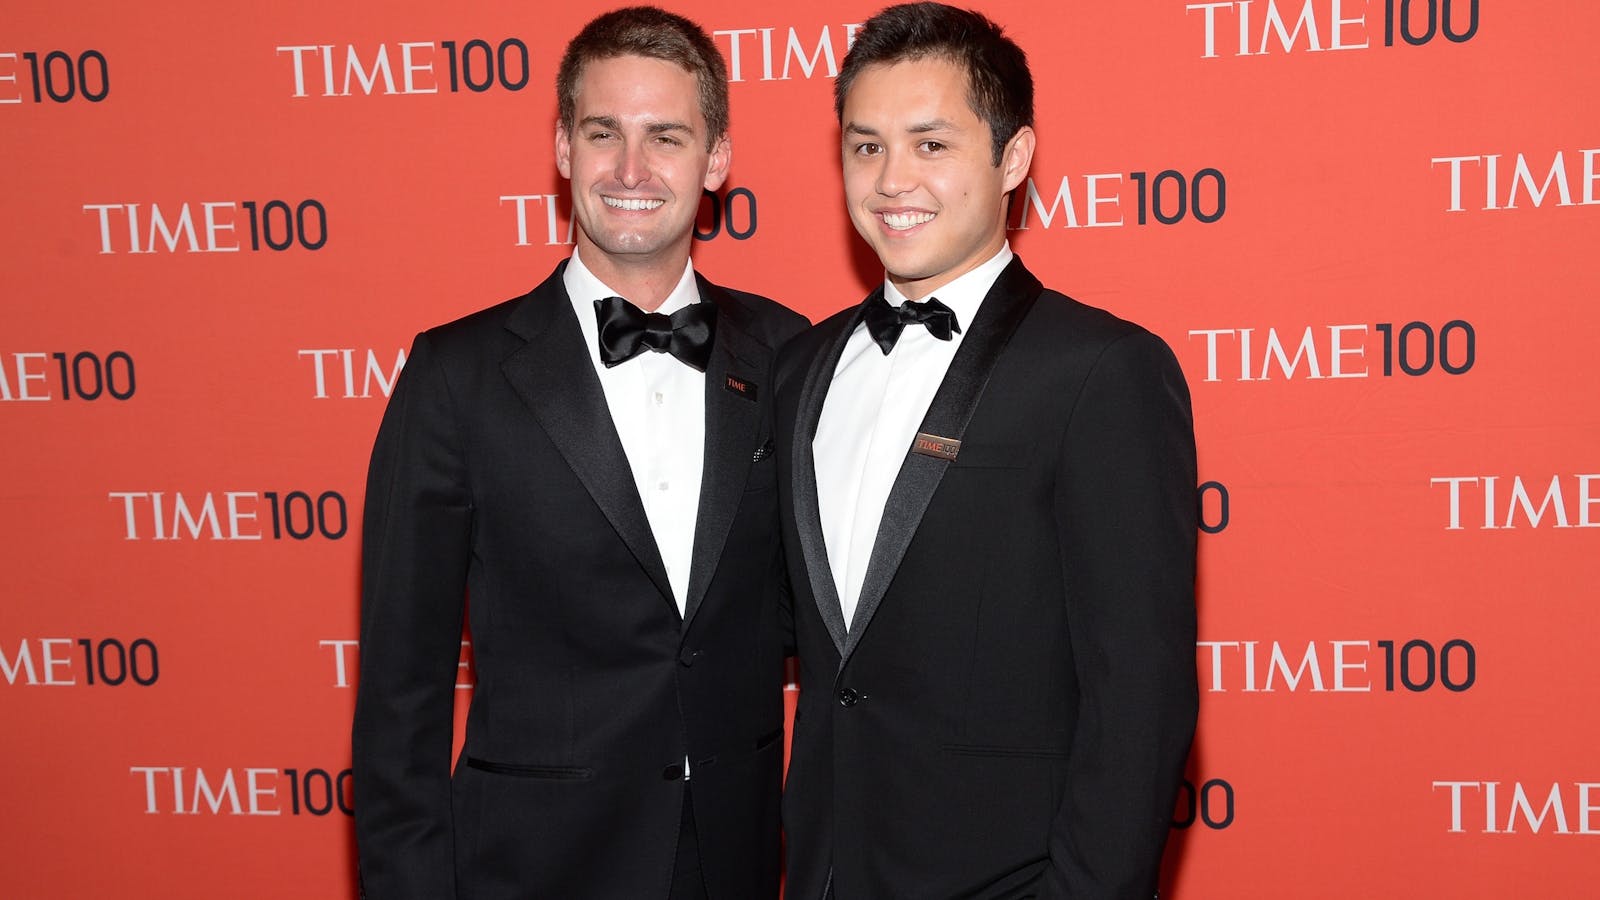 Snapchat CEO and co-founder Evan Spiegel, left, with co-founder and CTO Bobby Murphy. Photo by AP.